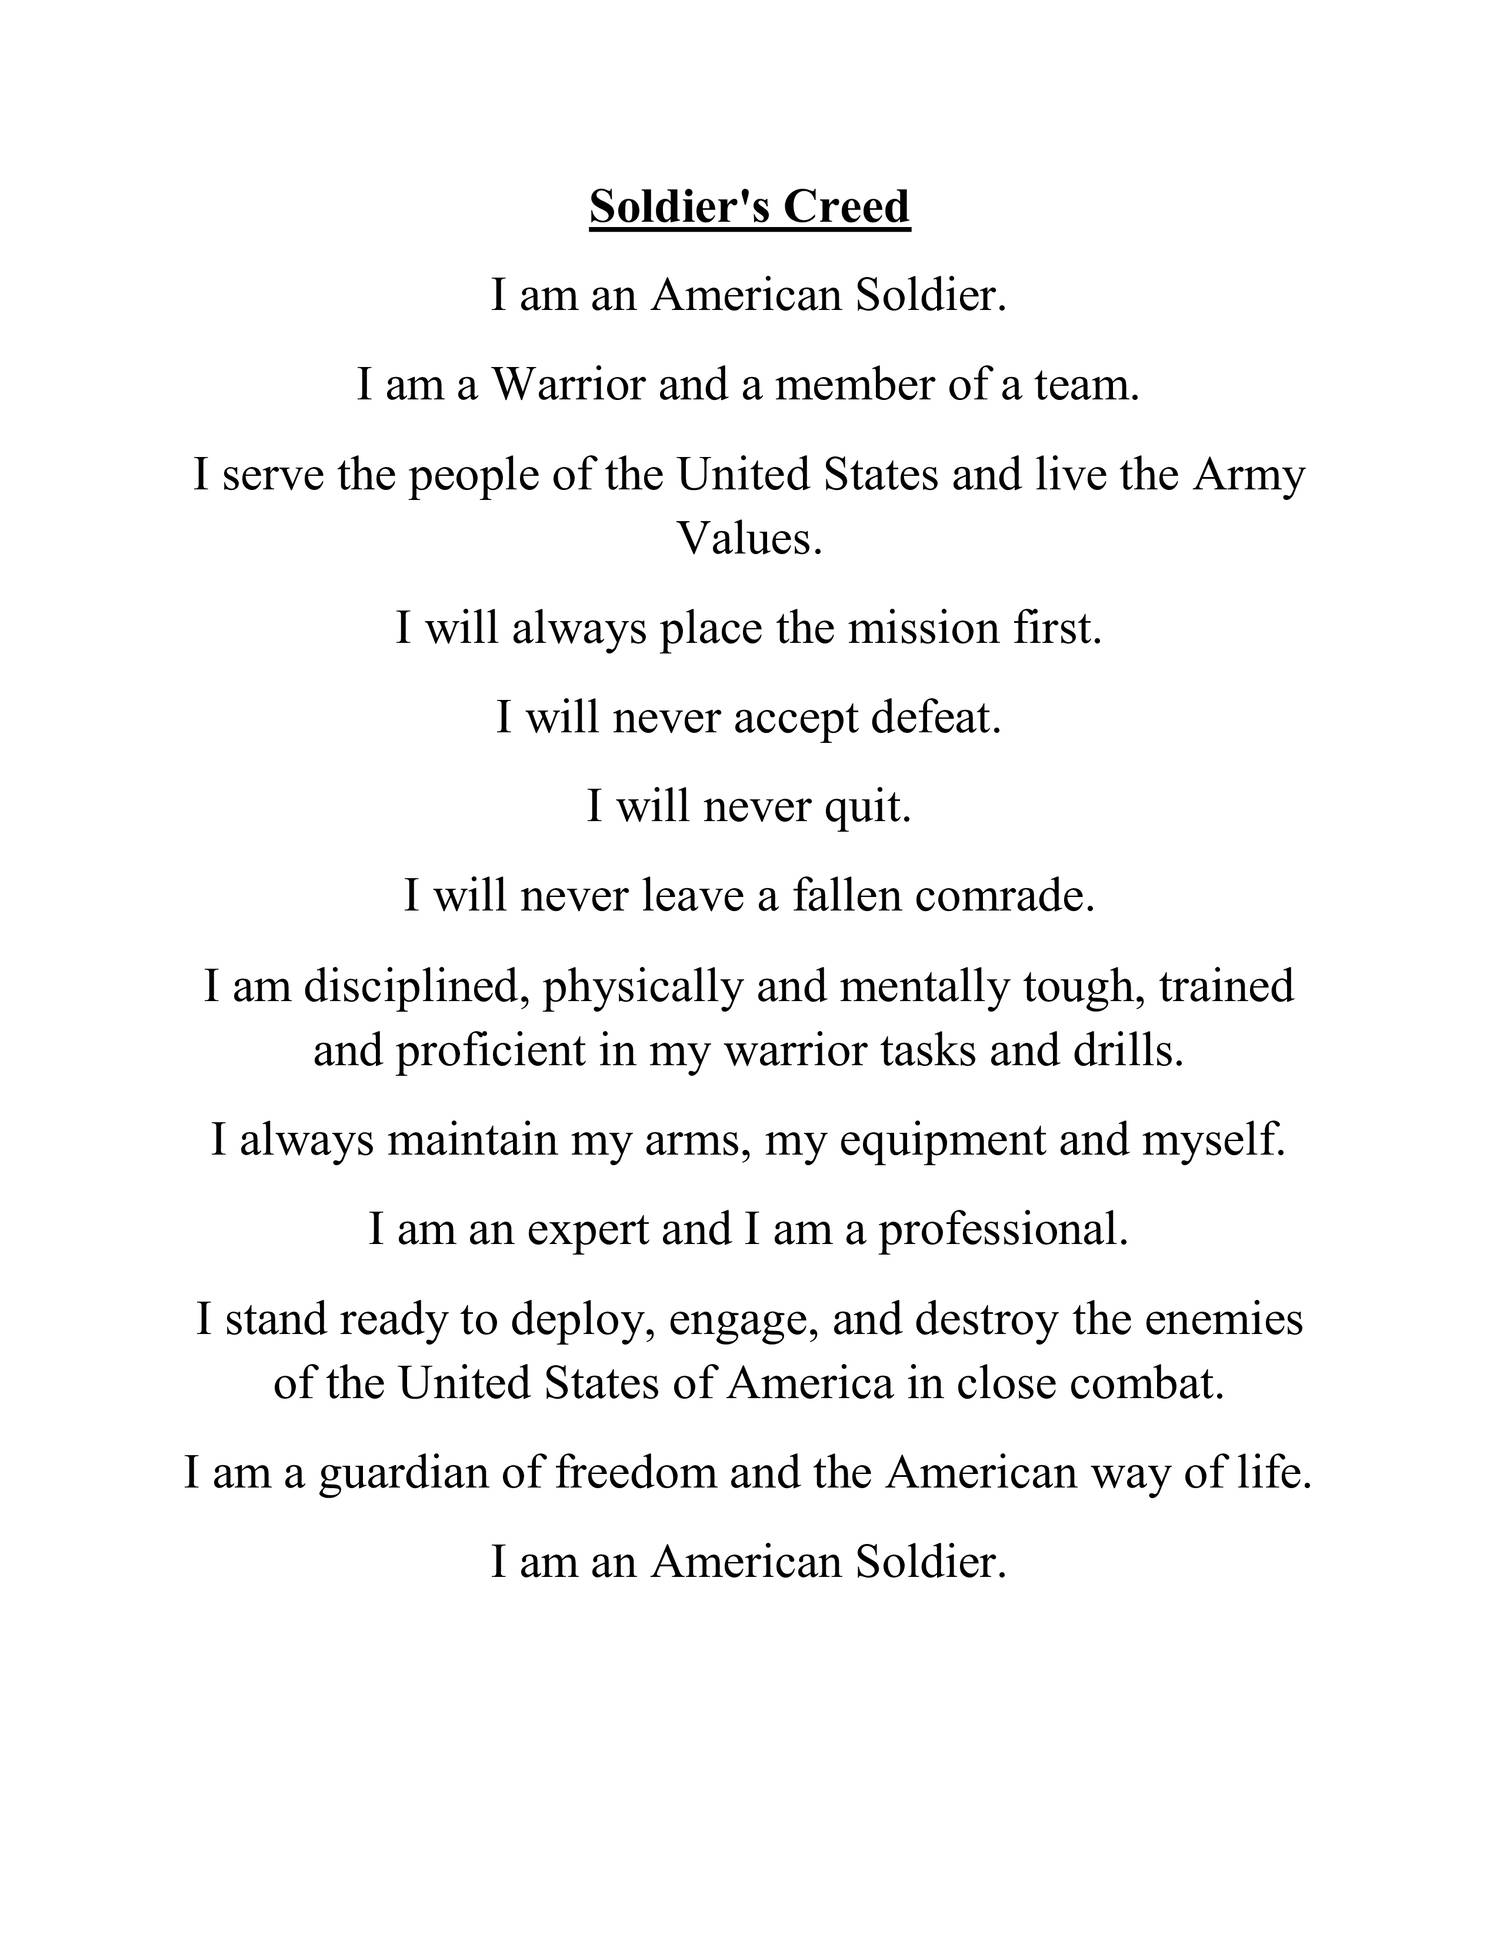 Soldier Creed pdf DocDroid